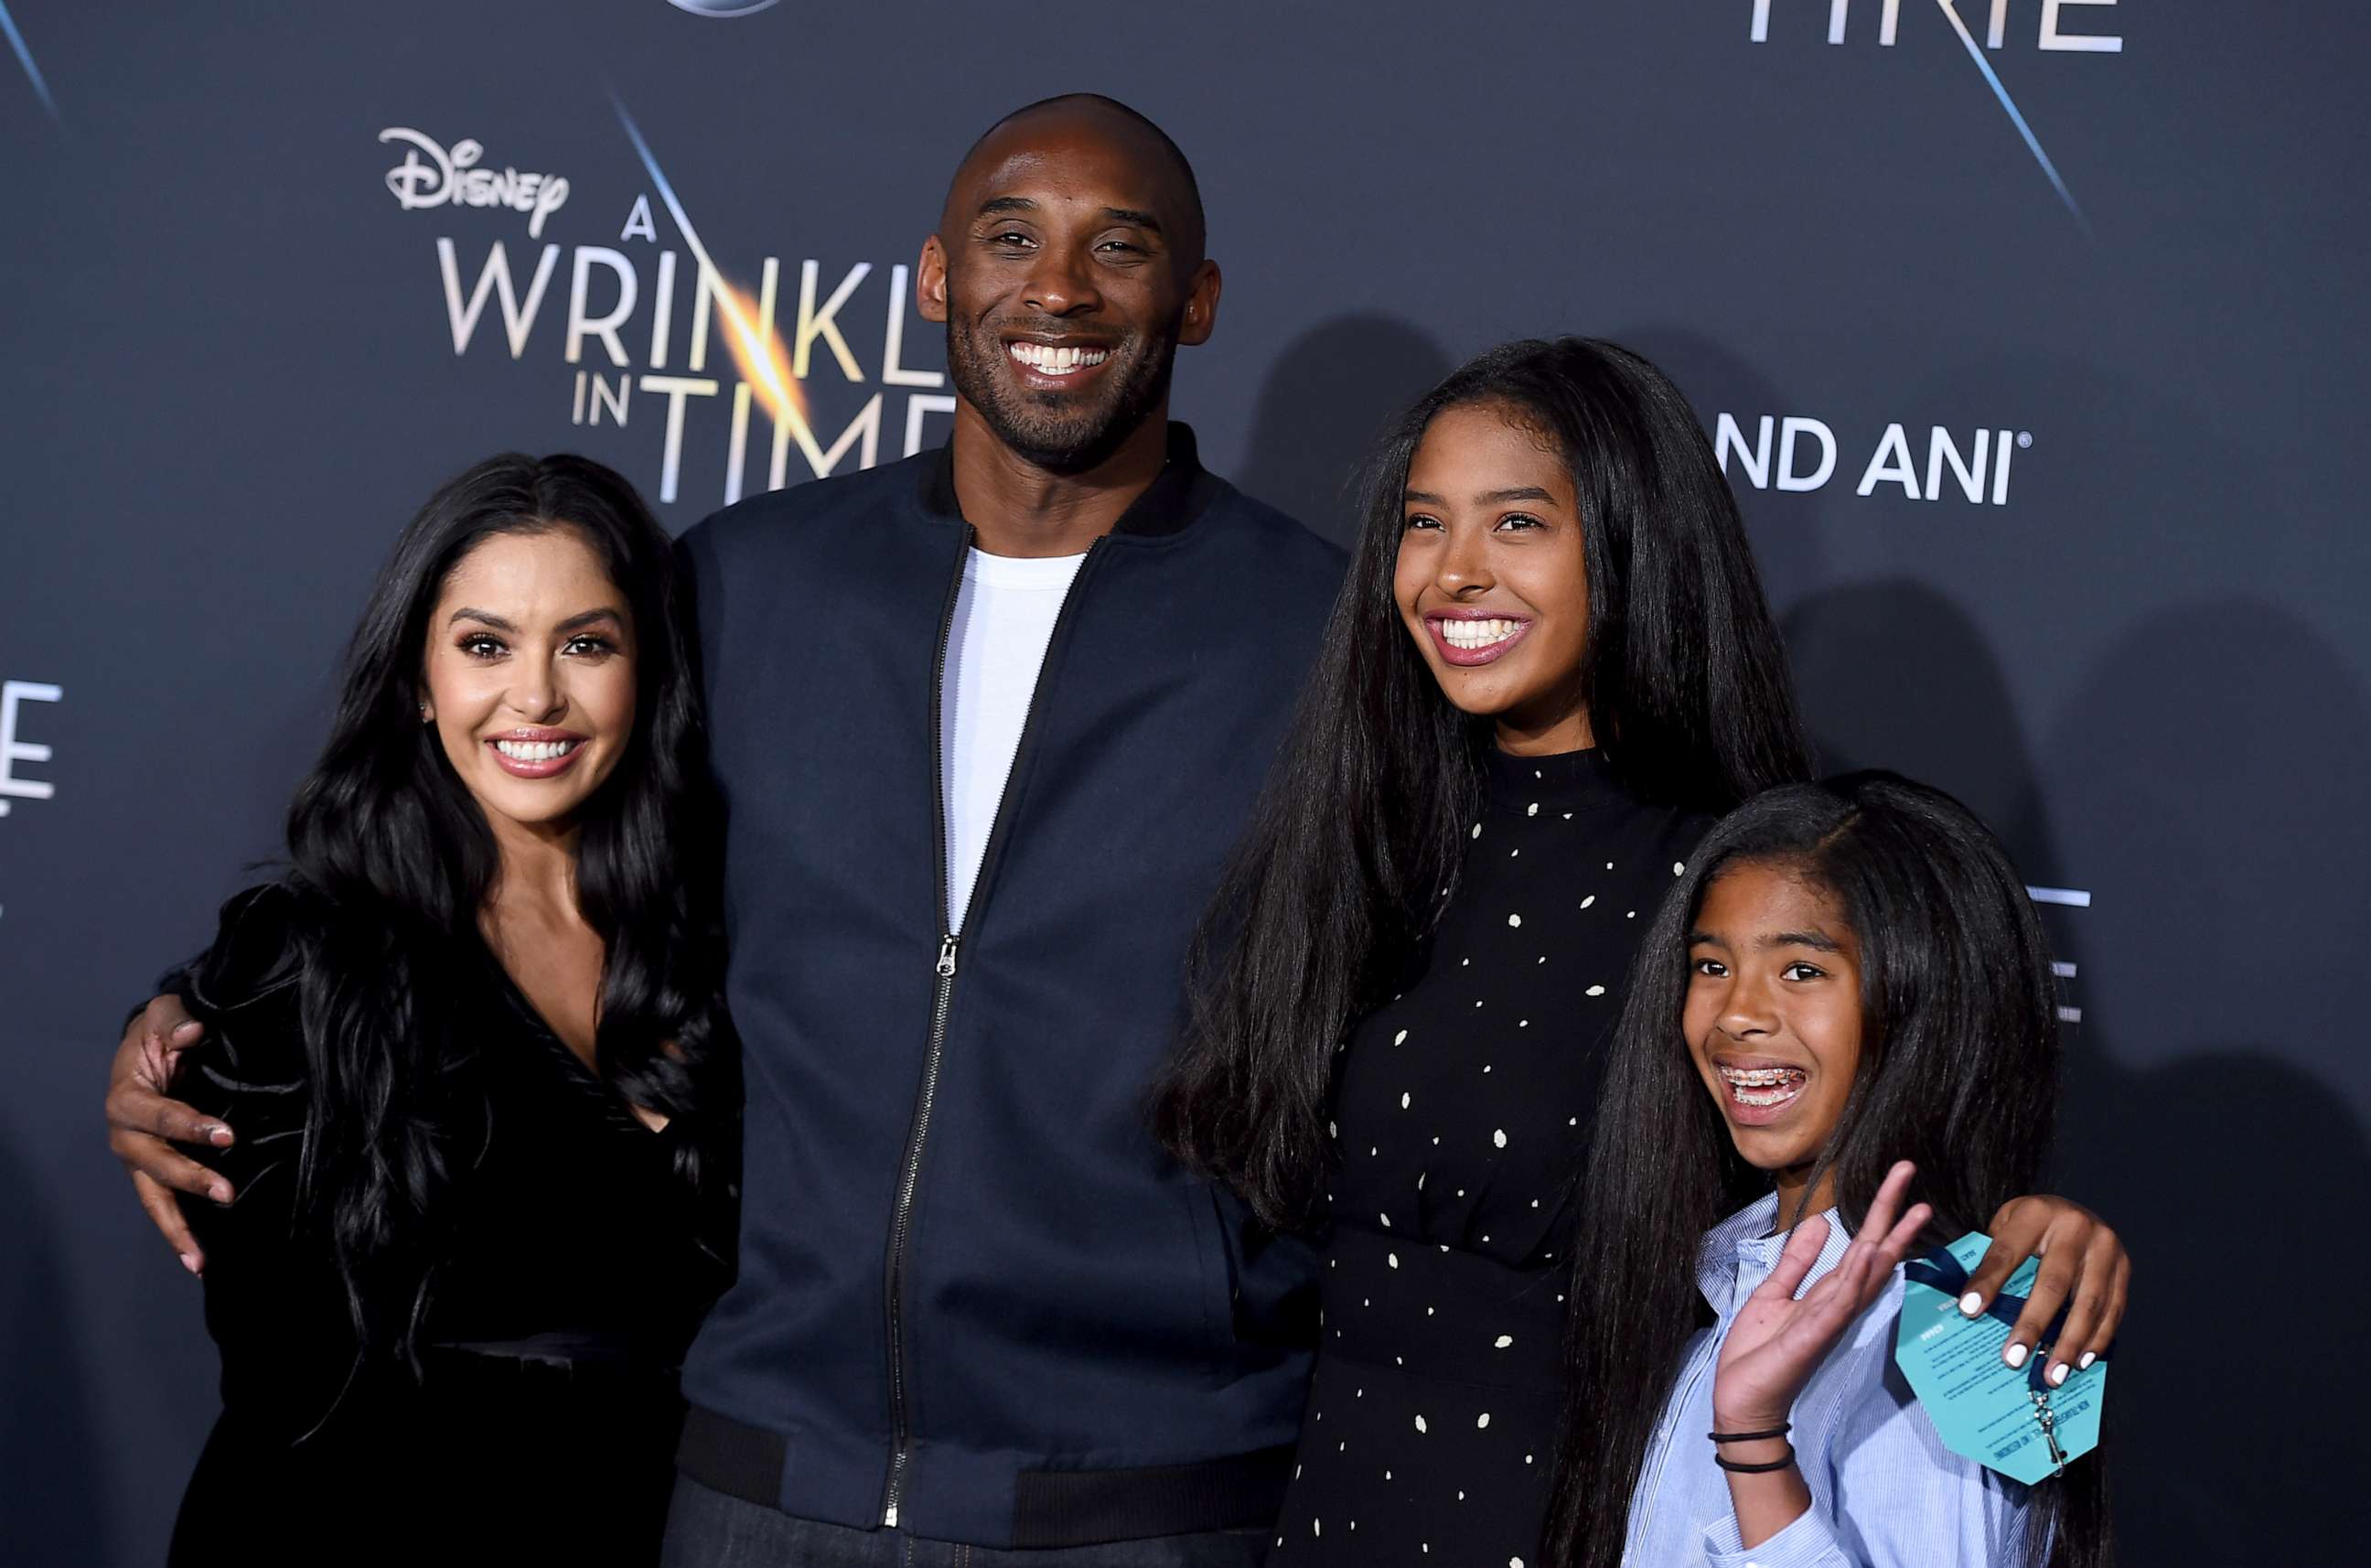 PHOTO: Vanessa Bryant, from left, Kobe Bryant, Natalia Bryant and Gianna Maria-Onore Bryant at the world premiere of "A Wrinkle in Time" at the El Capitan Theatre on Feb. 26, 2018, in Los Angeles.